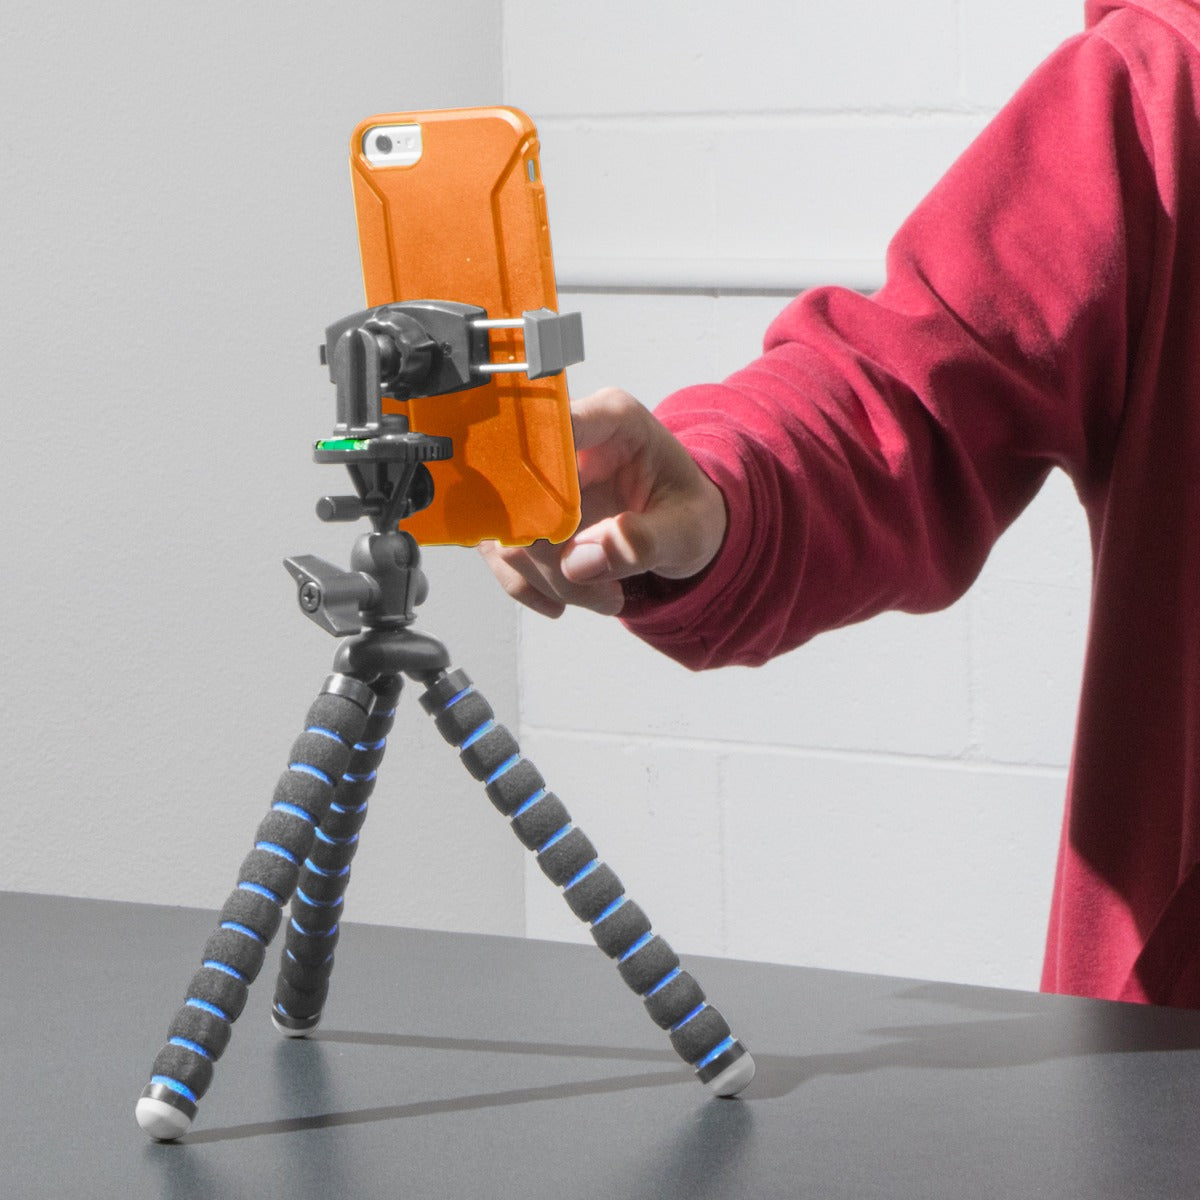 iBOLT Tripod miniPro XL Flexible 3-in-1 :11 inch Tripod for Smartphones, Cameras, and GoPros